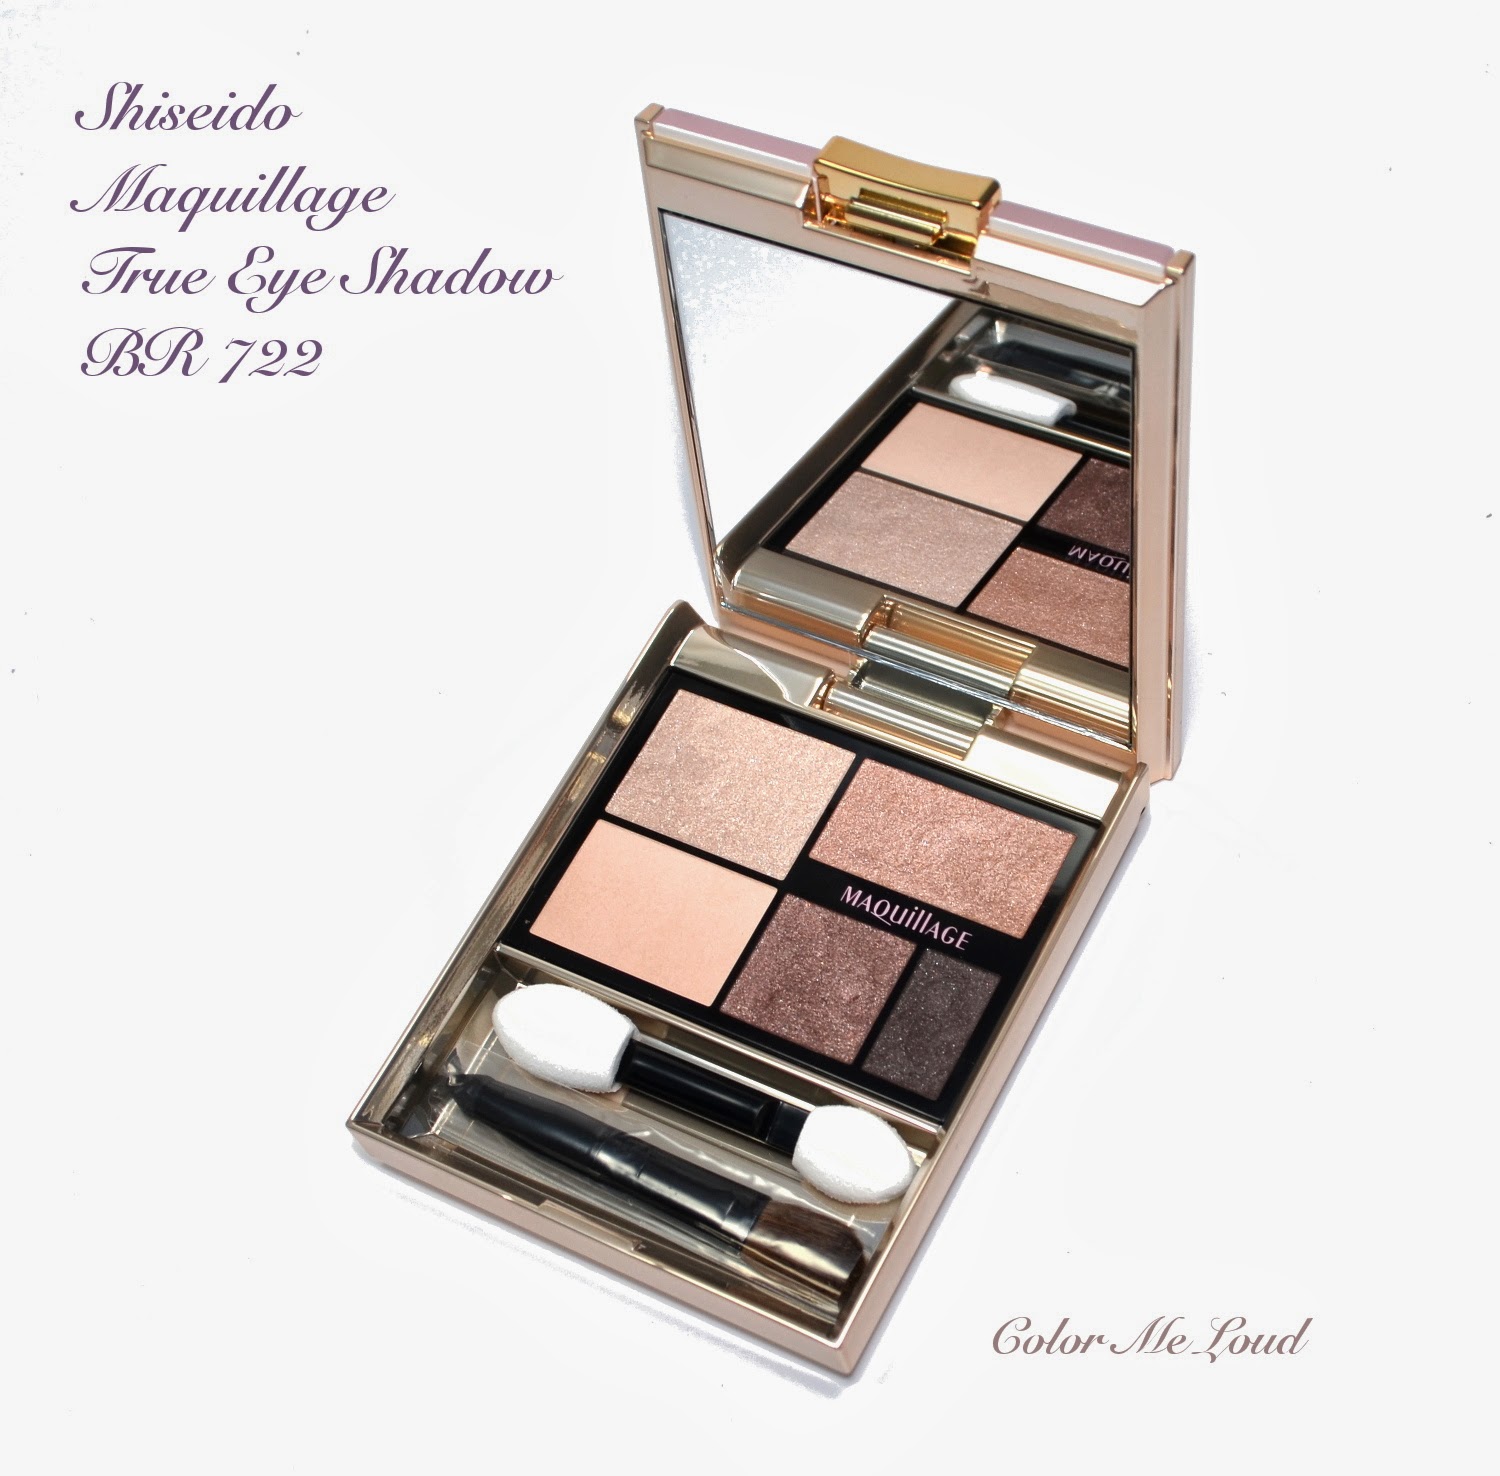 Shiseido Maquillage True Eyeshadow in BR722, Review, Swatch & EOTD